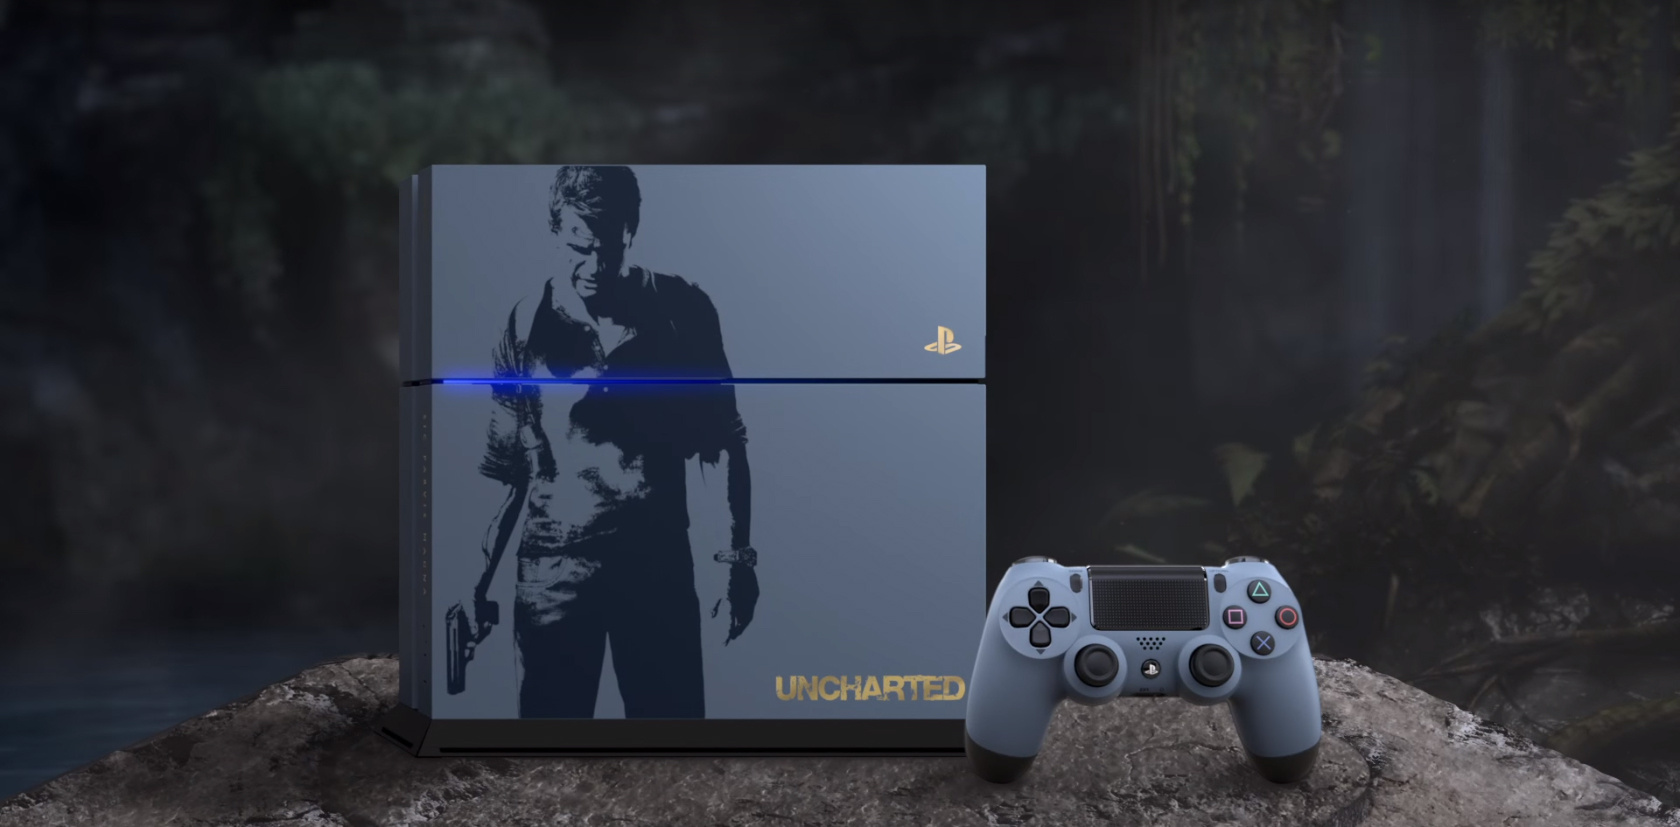 playstation 4 uncharted 4 limited edition